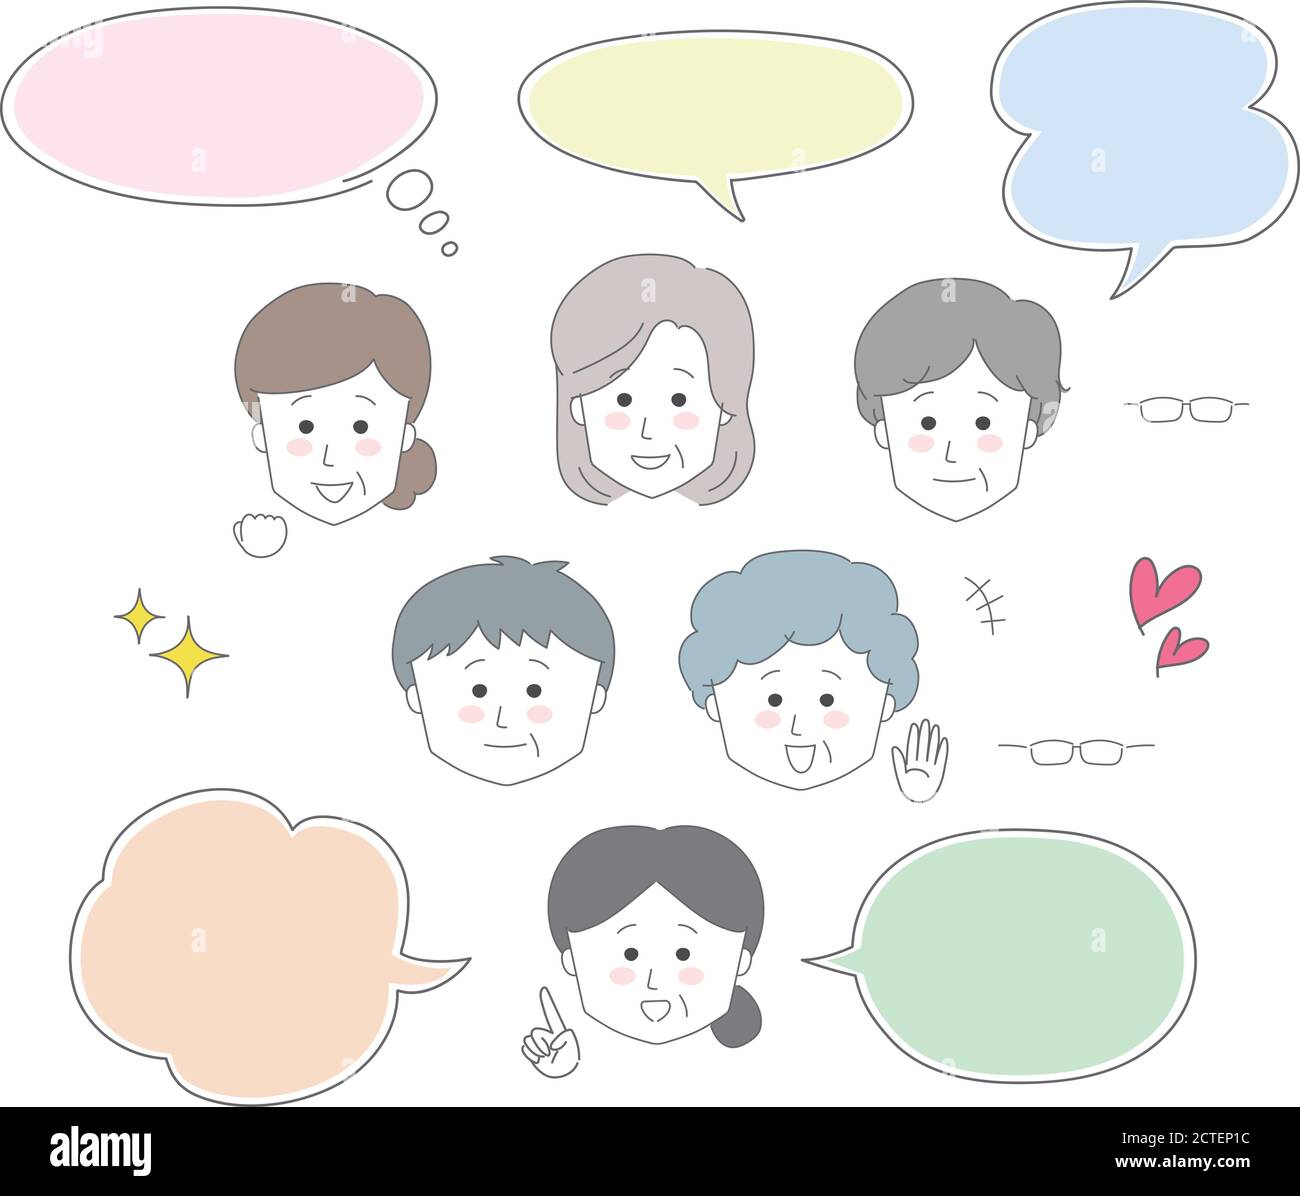 Speech bubbles and profile pictures of middle aged women. Vector illustration isolated on white background. Stock Vector